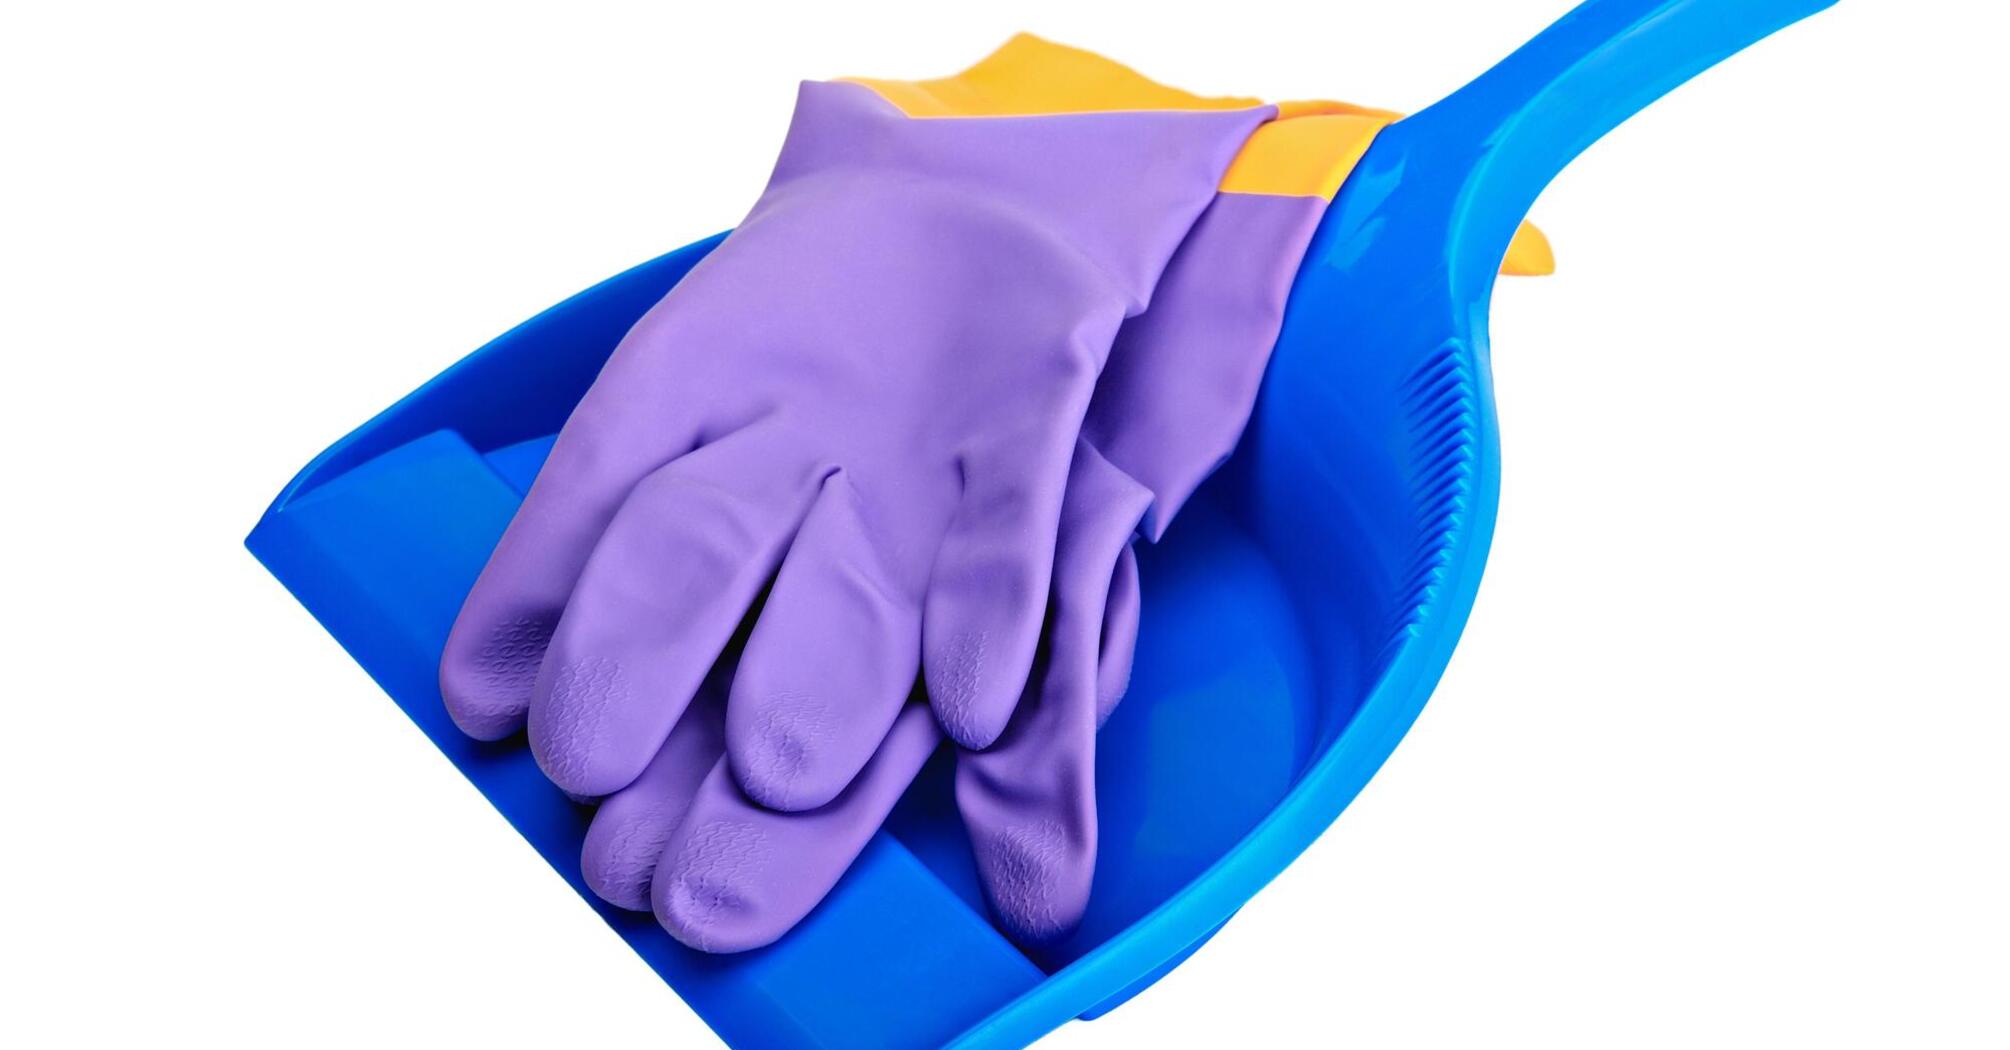 Purple rubber gloves and blue dustpan on a white background